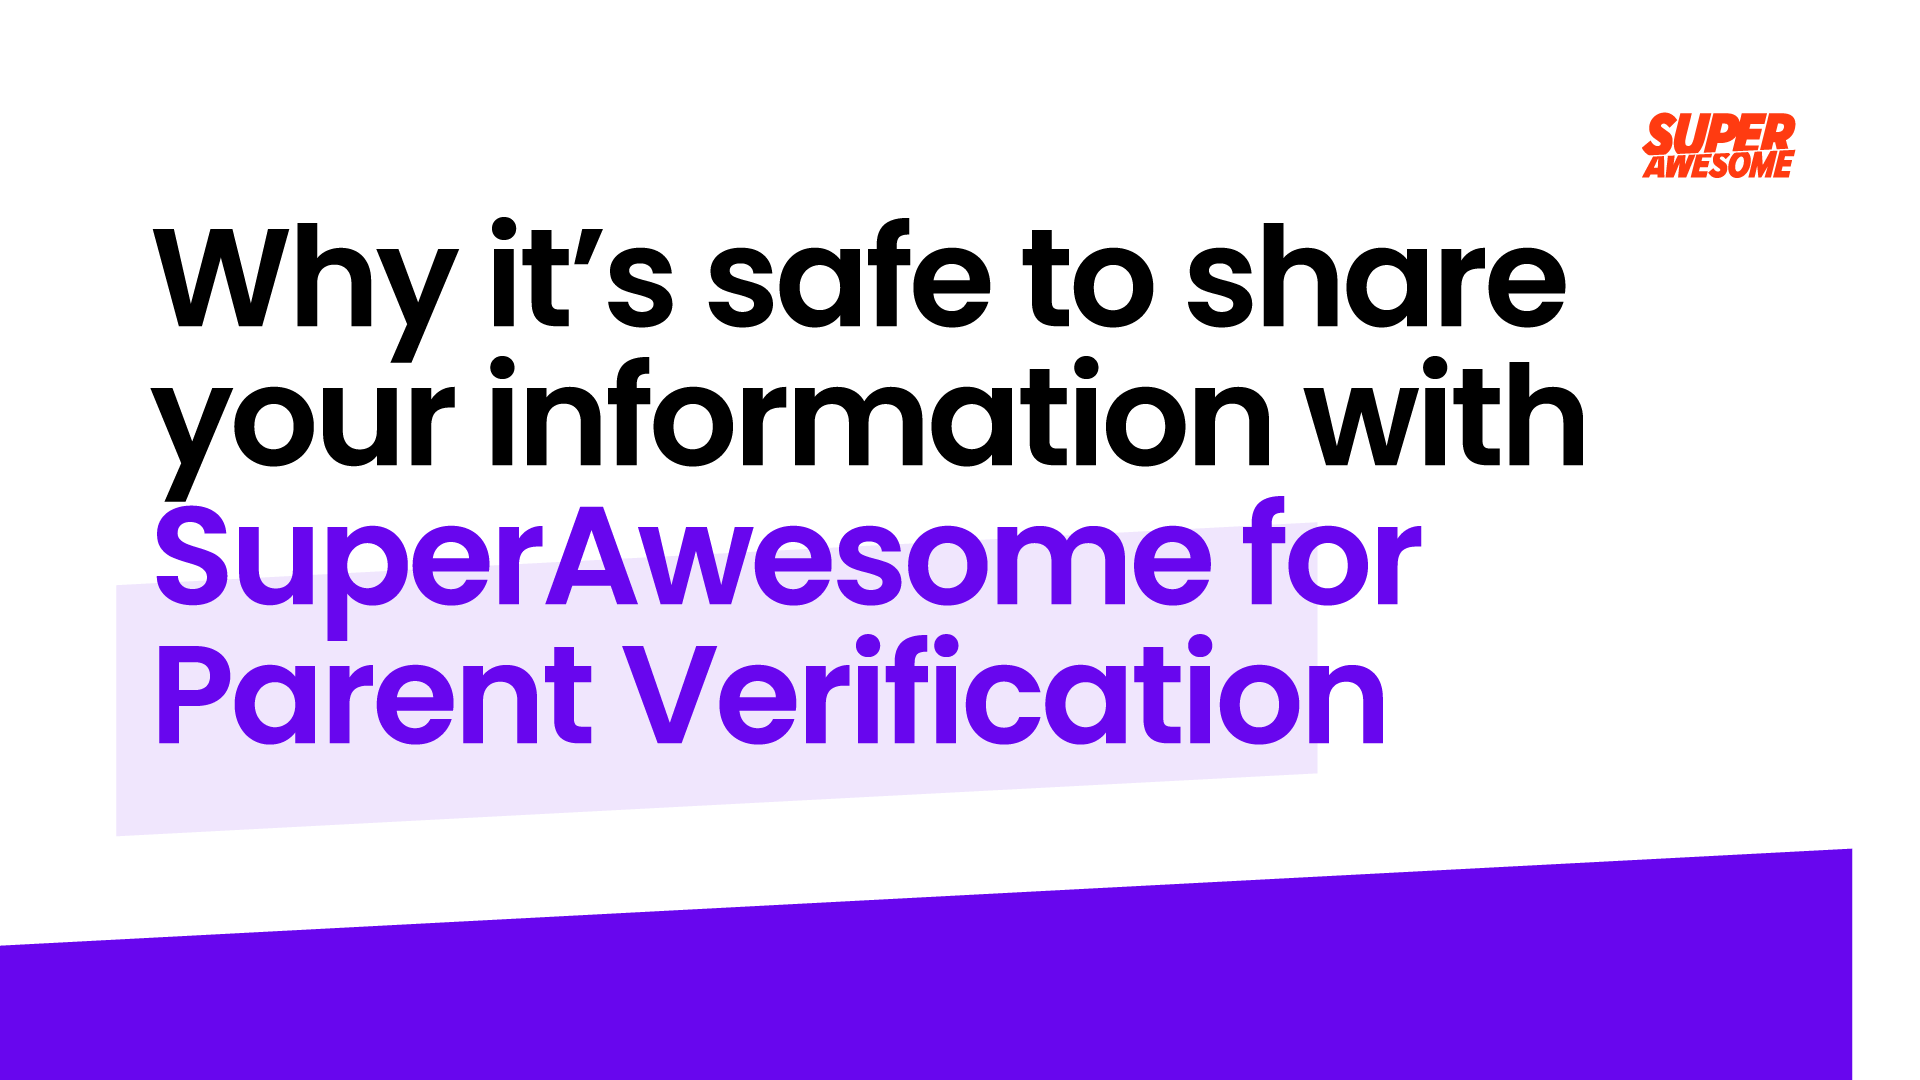 Why it's Safe to Share Your Information with SuperAwesome for Parent Verification